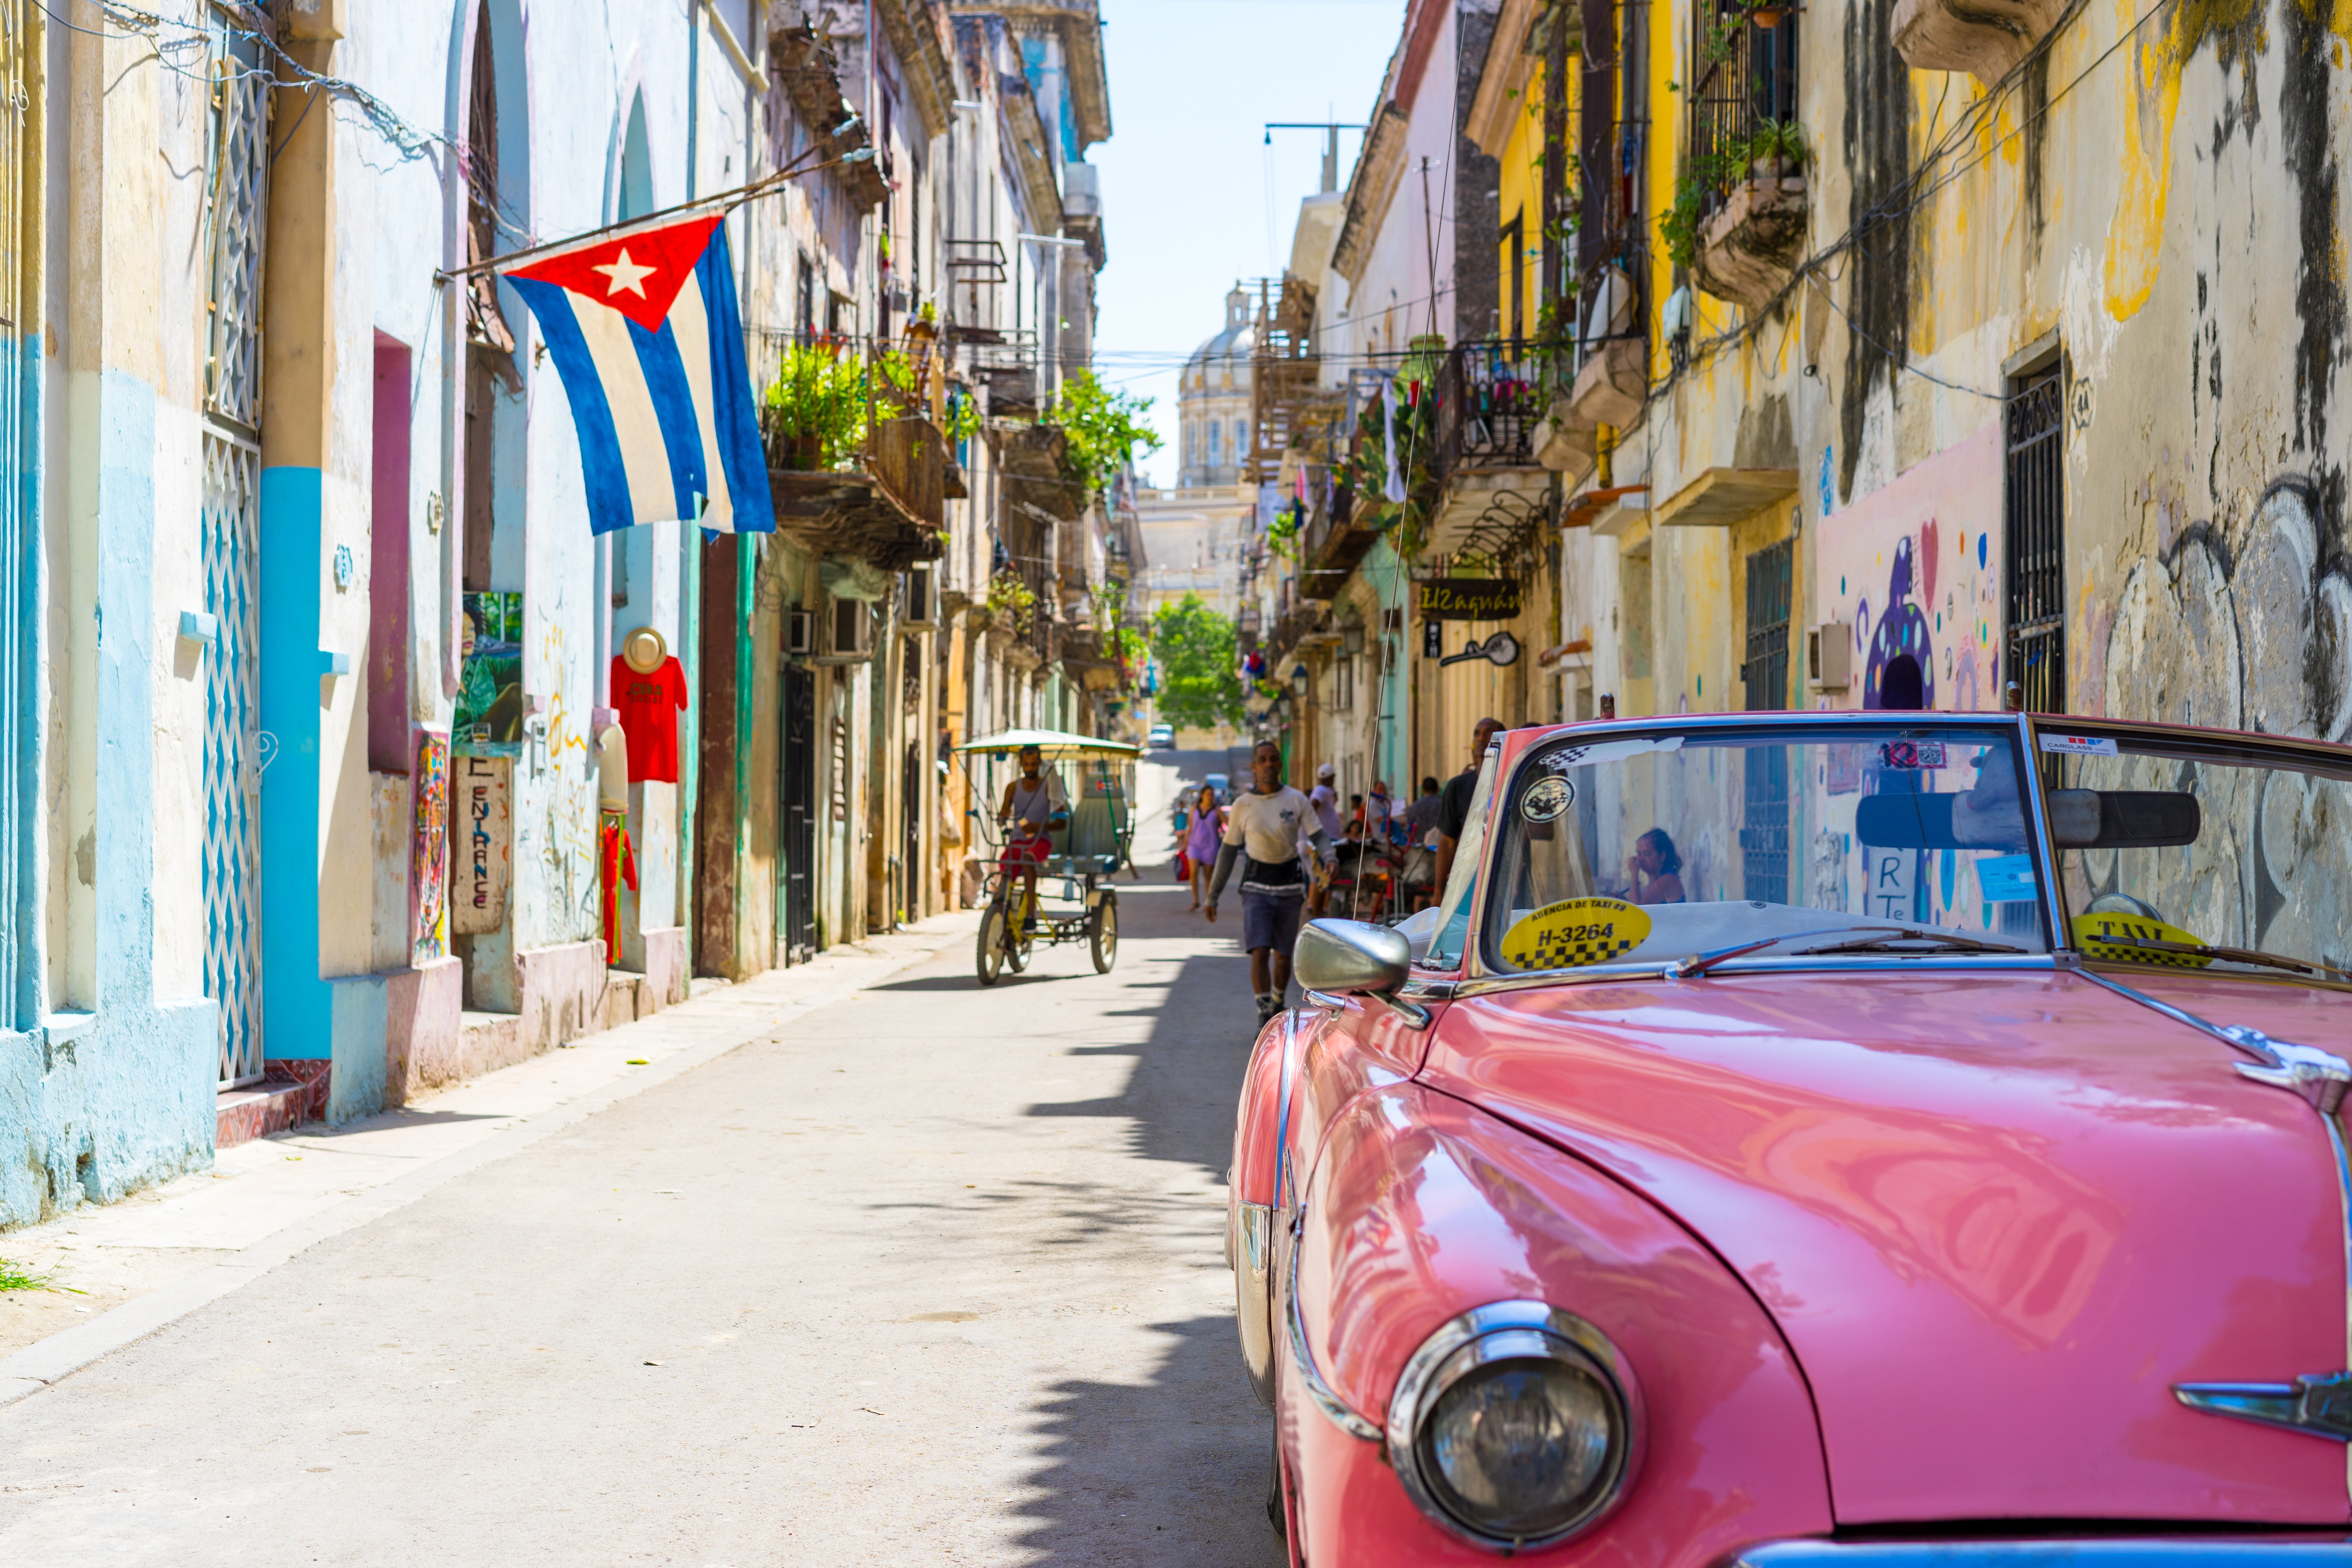 Getting to know Havana’s travel quirks